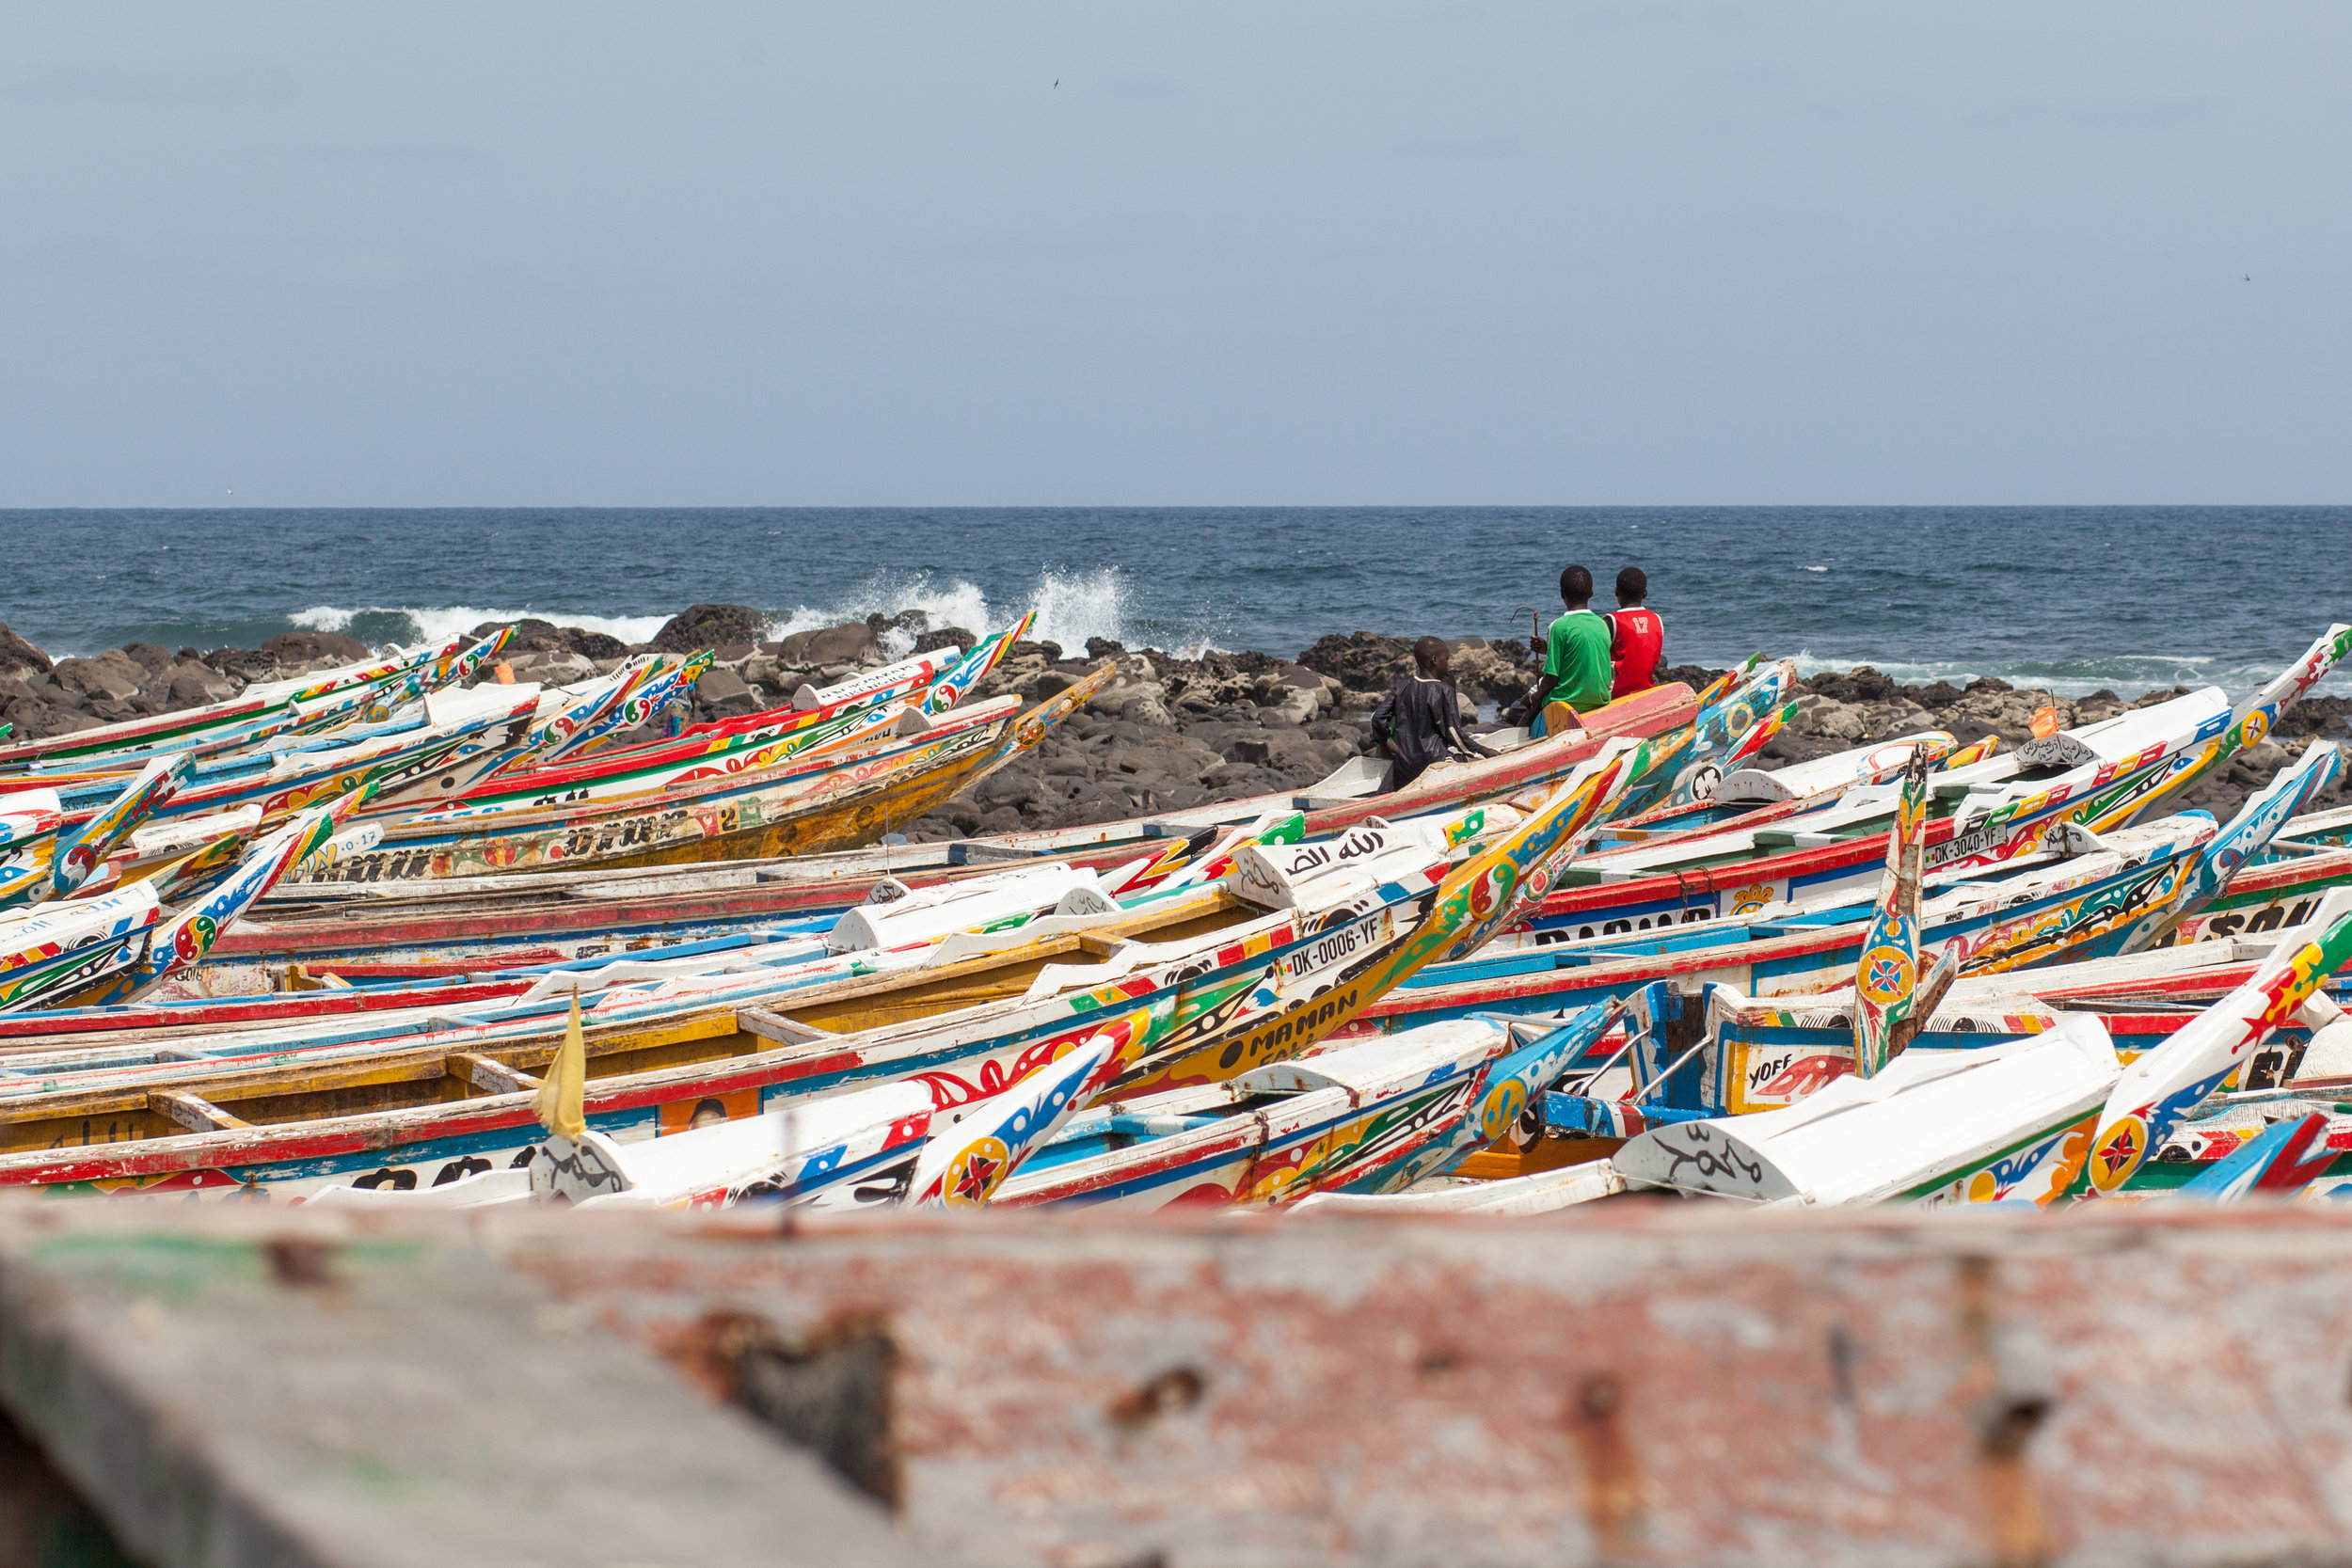 Children wearing football T-Shirts sit amongst the fishing boats at the far end of the beach at Yoff in Dakar.